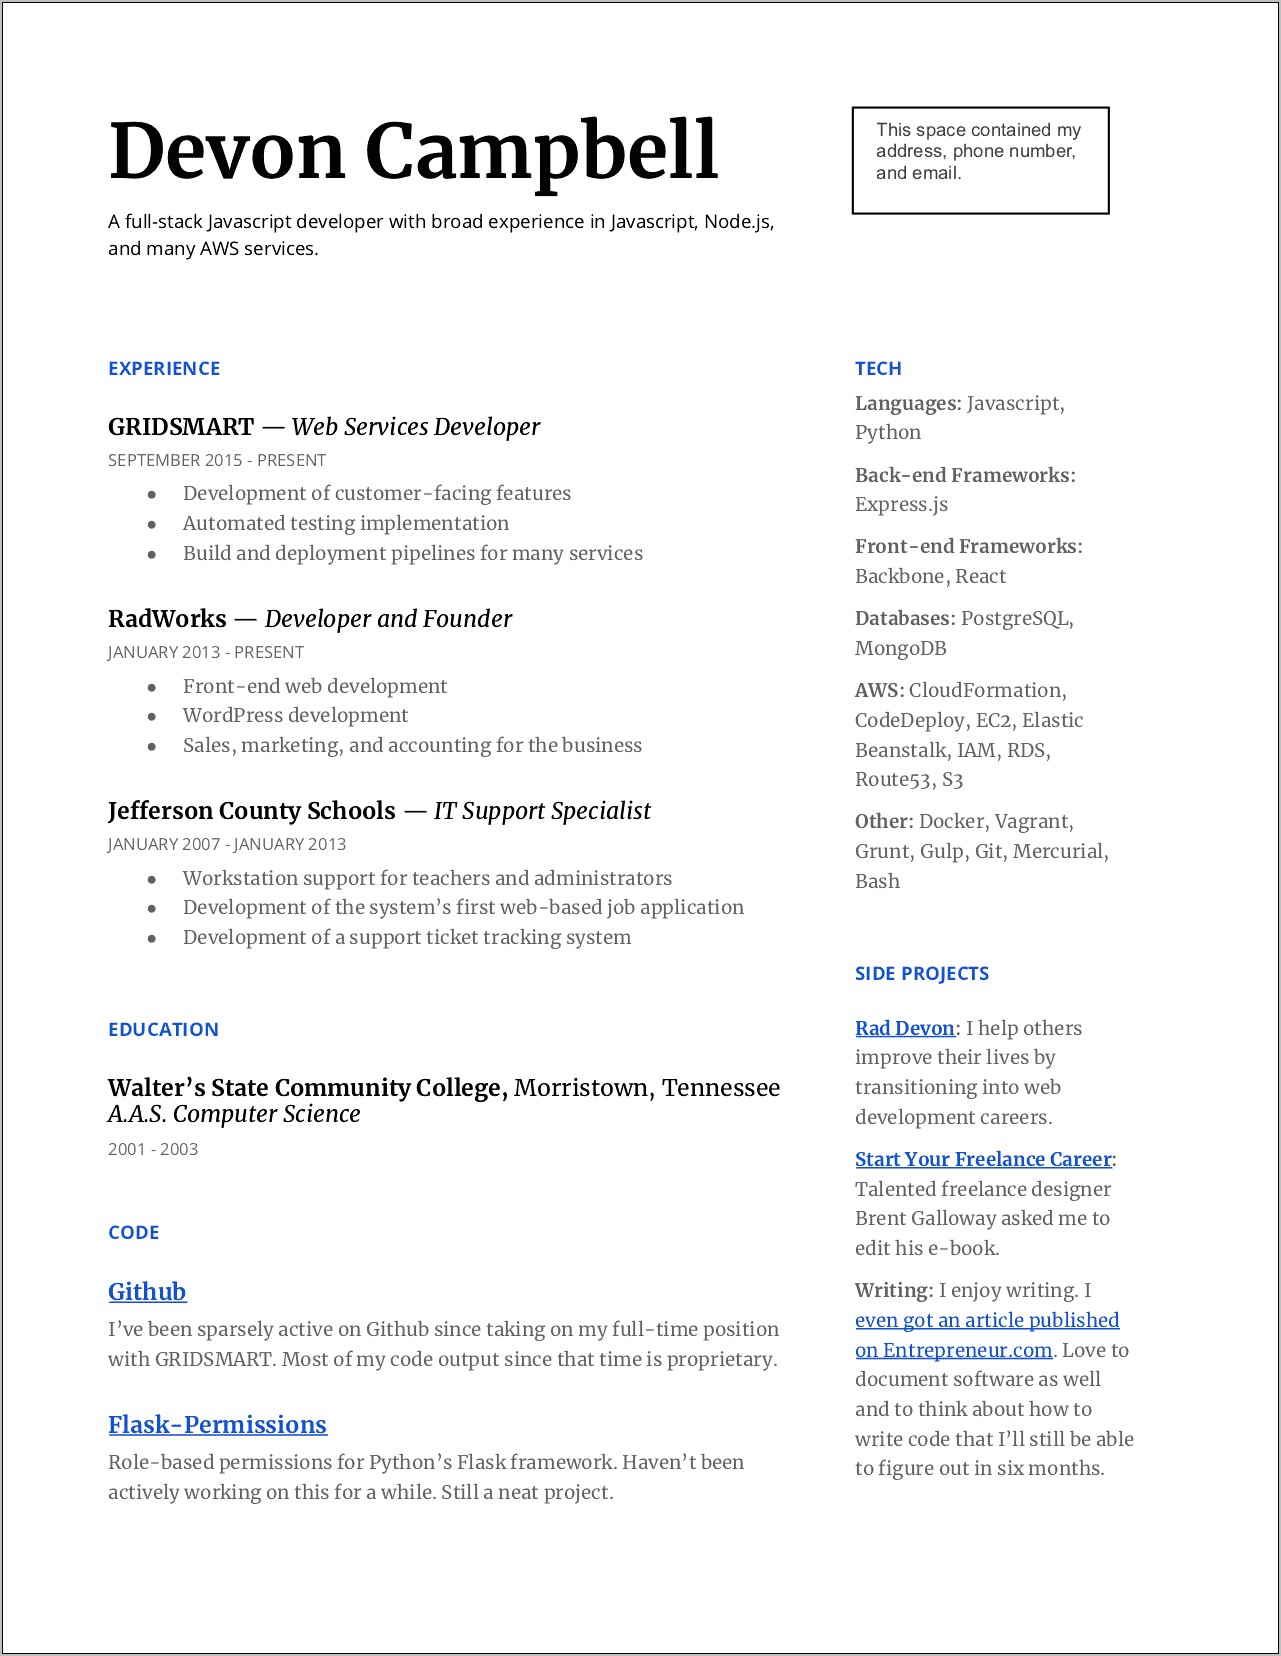 Resume Of Developer With Experience